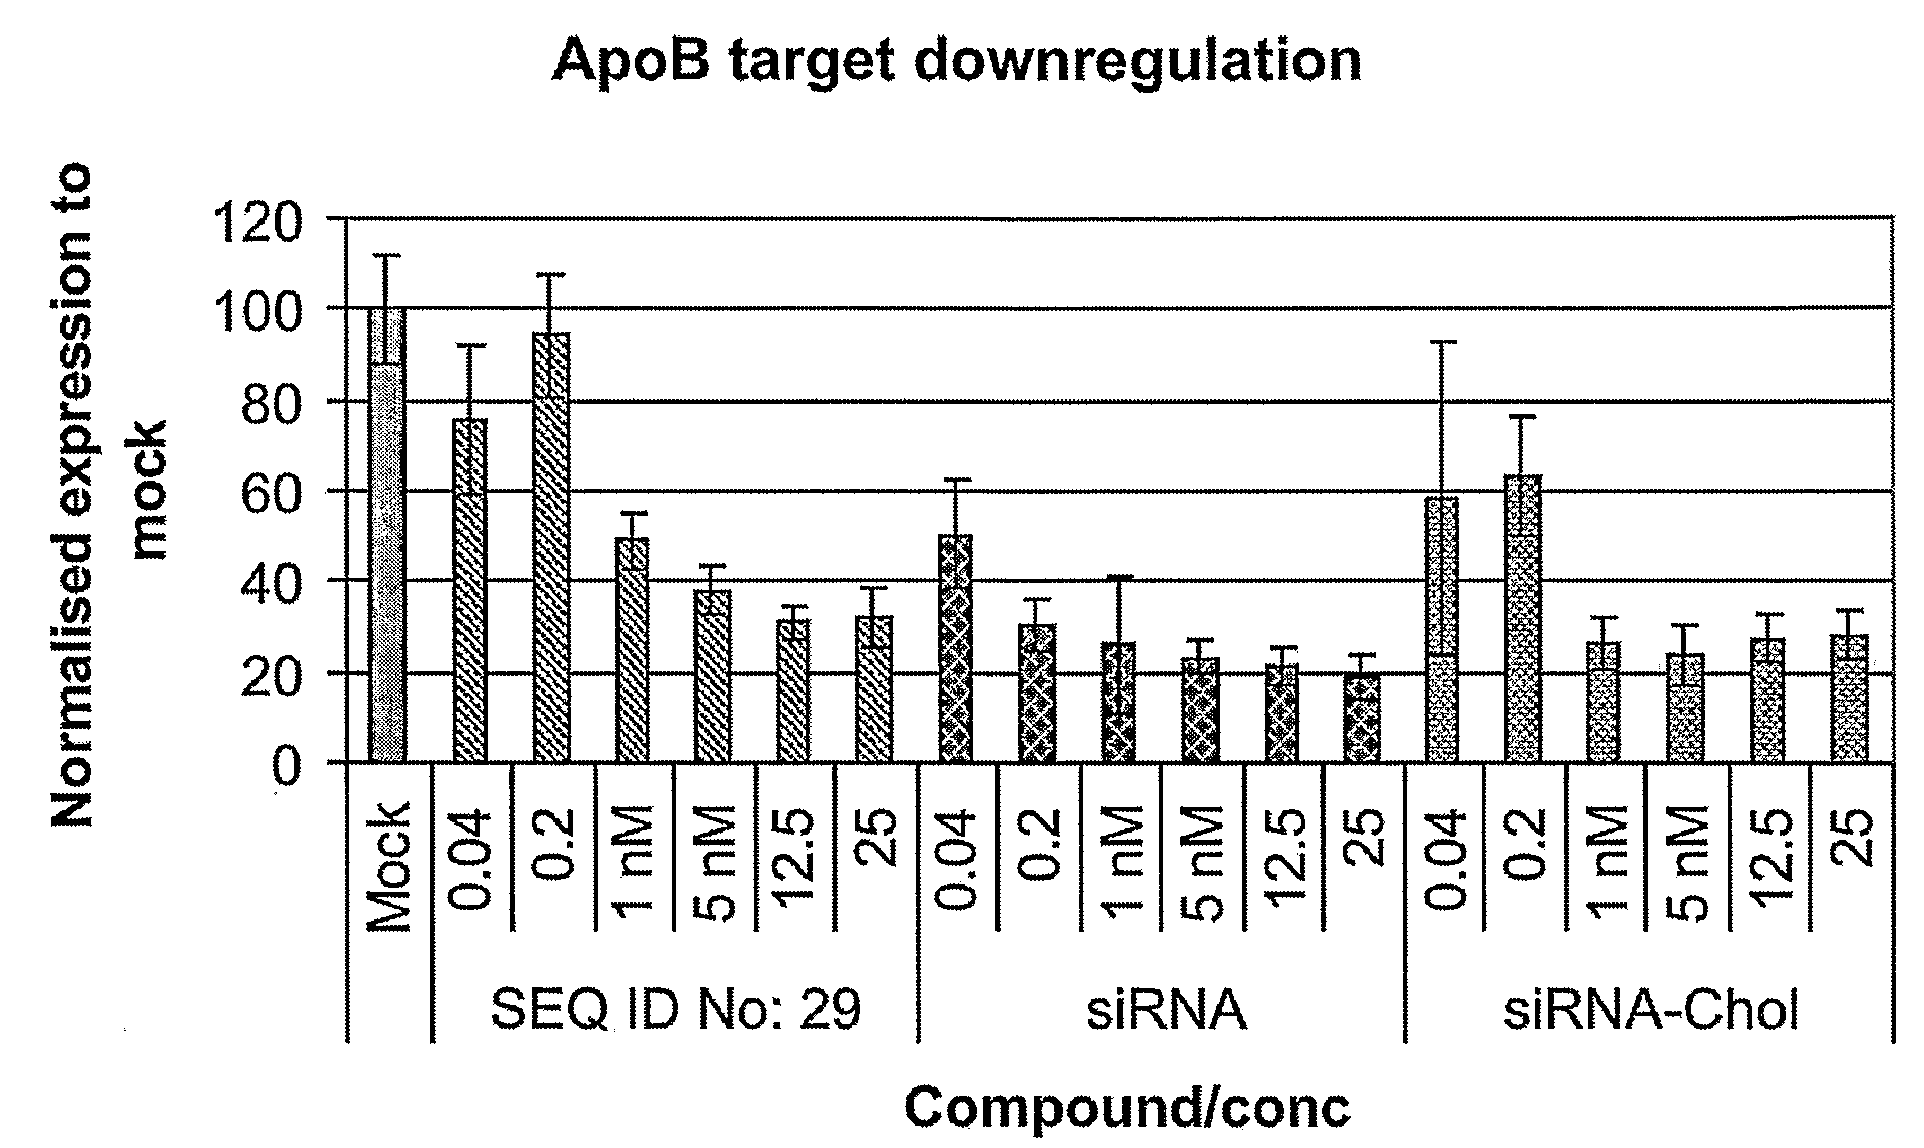 RNA antagonist compounds for the inhibition of apo-b100 expression